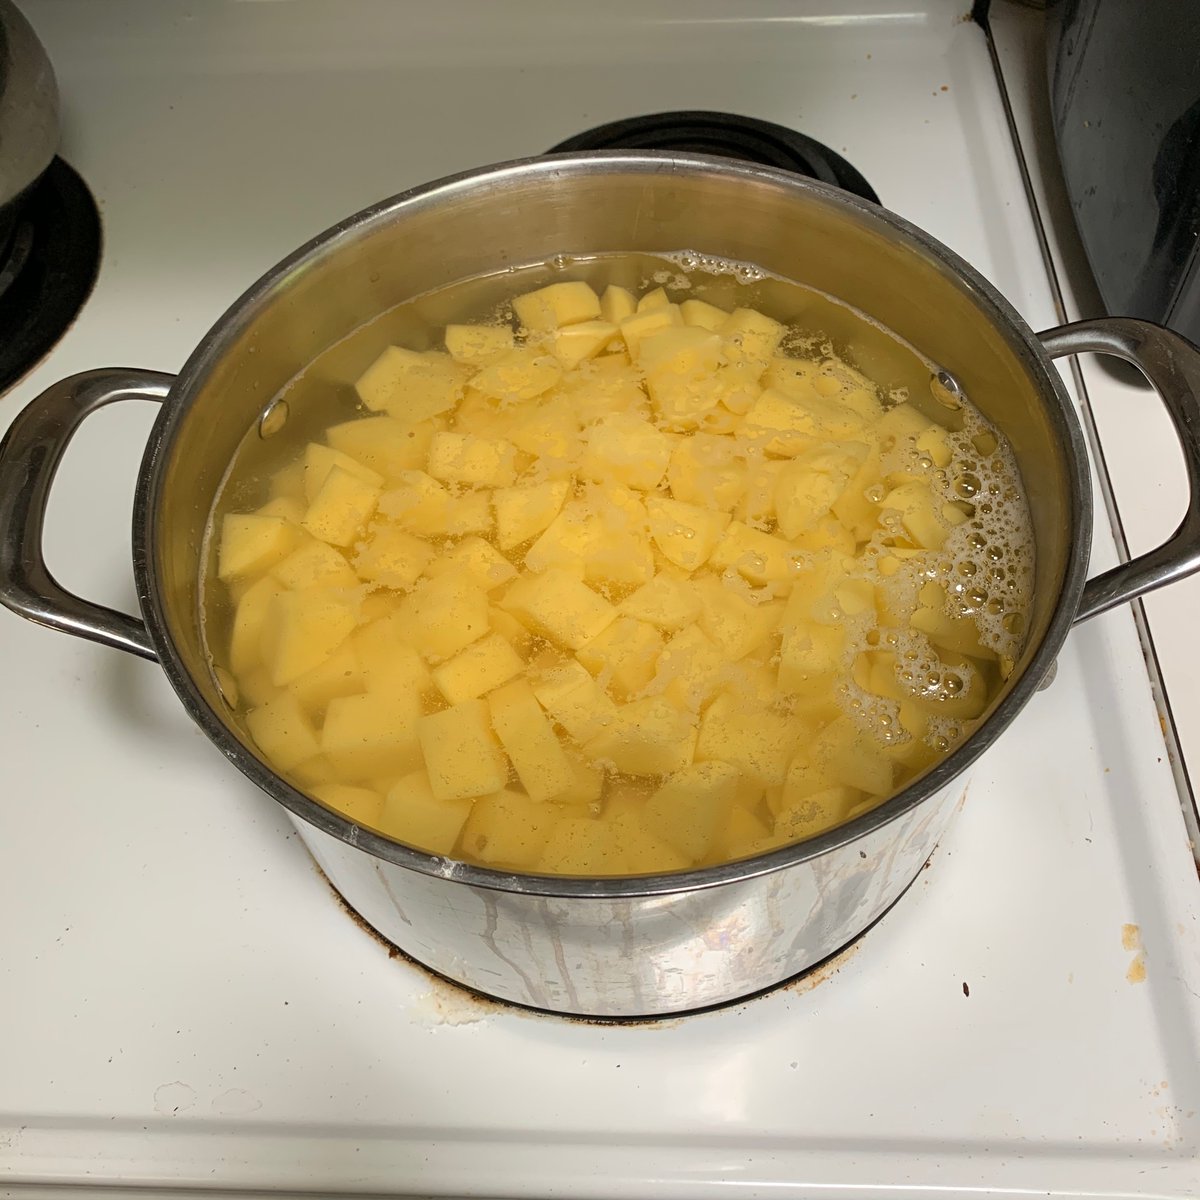 5 lbs gold potatoes, peeled and diced. Even with her arthritis, my mother could've done this in half the time. I remember a cook on one of my wife's cooking shows said to boil potatoes in salty water. I added 10 quick grinds from our salt grinder. ?/